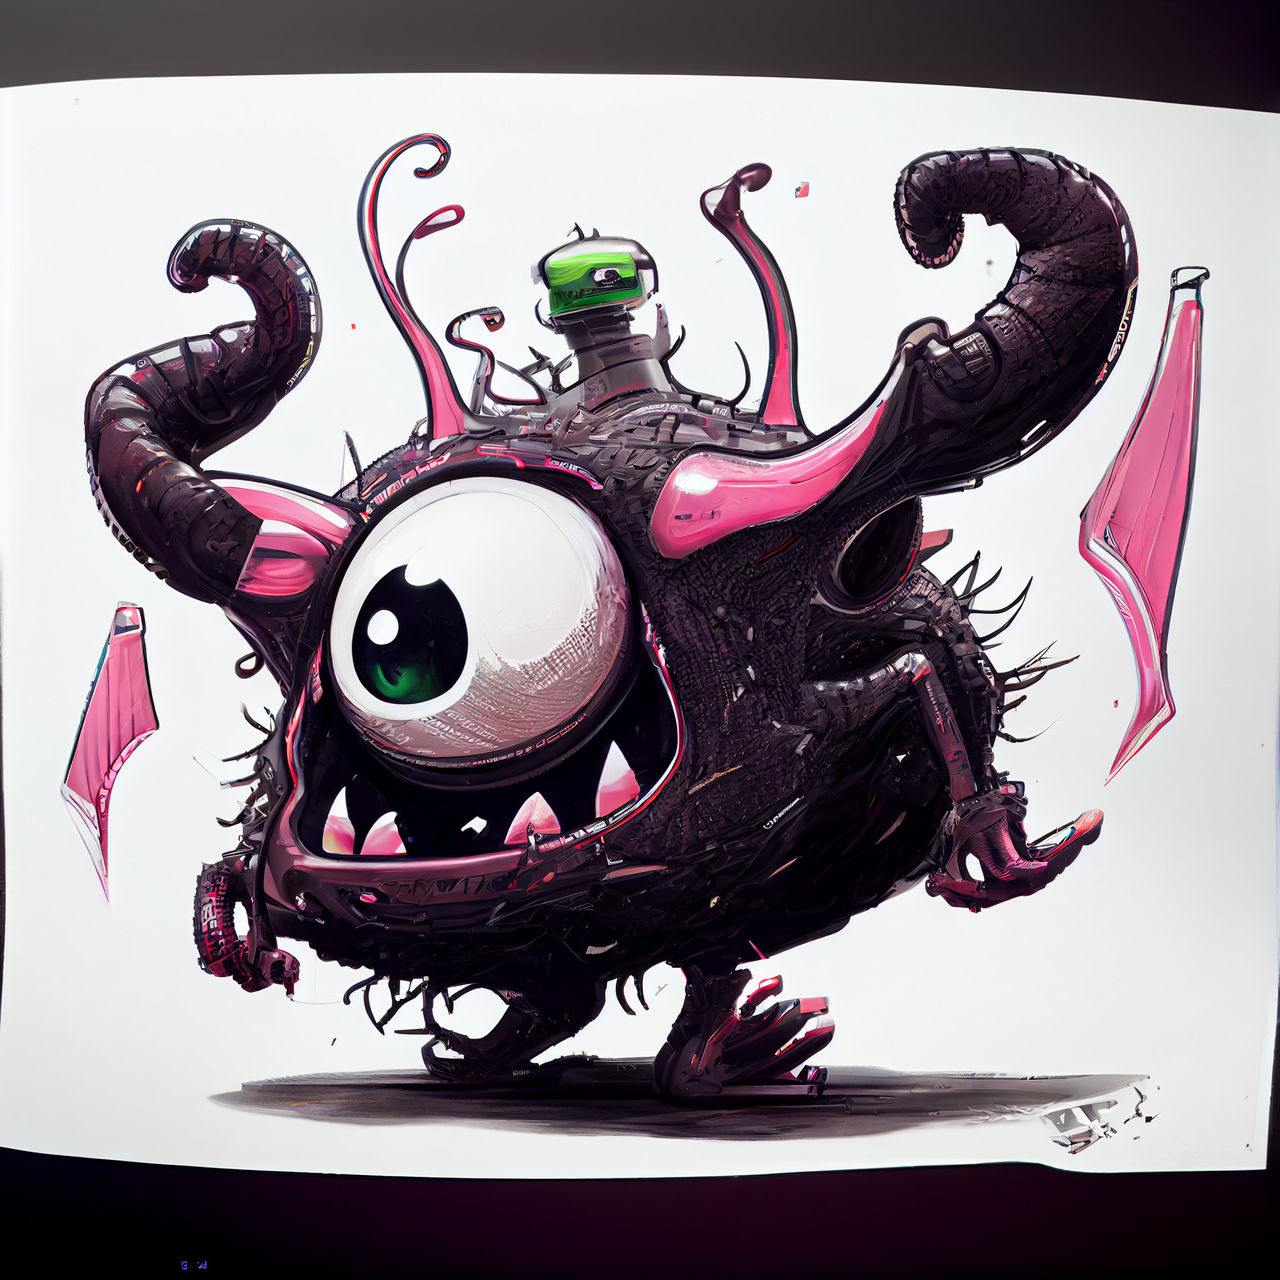 Silly Monster by NateKeith on DeviantArt